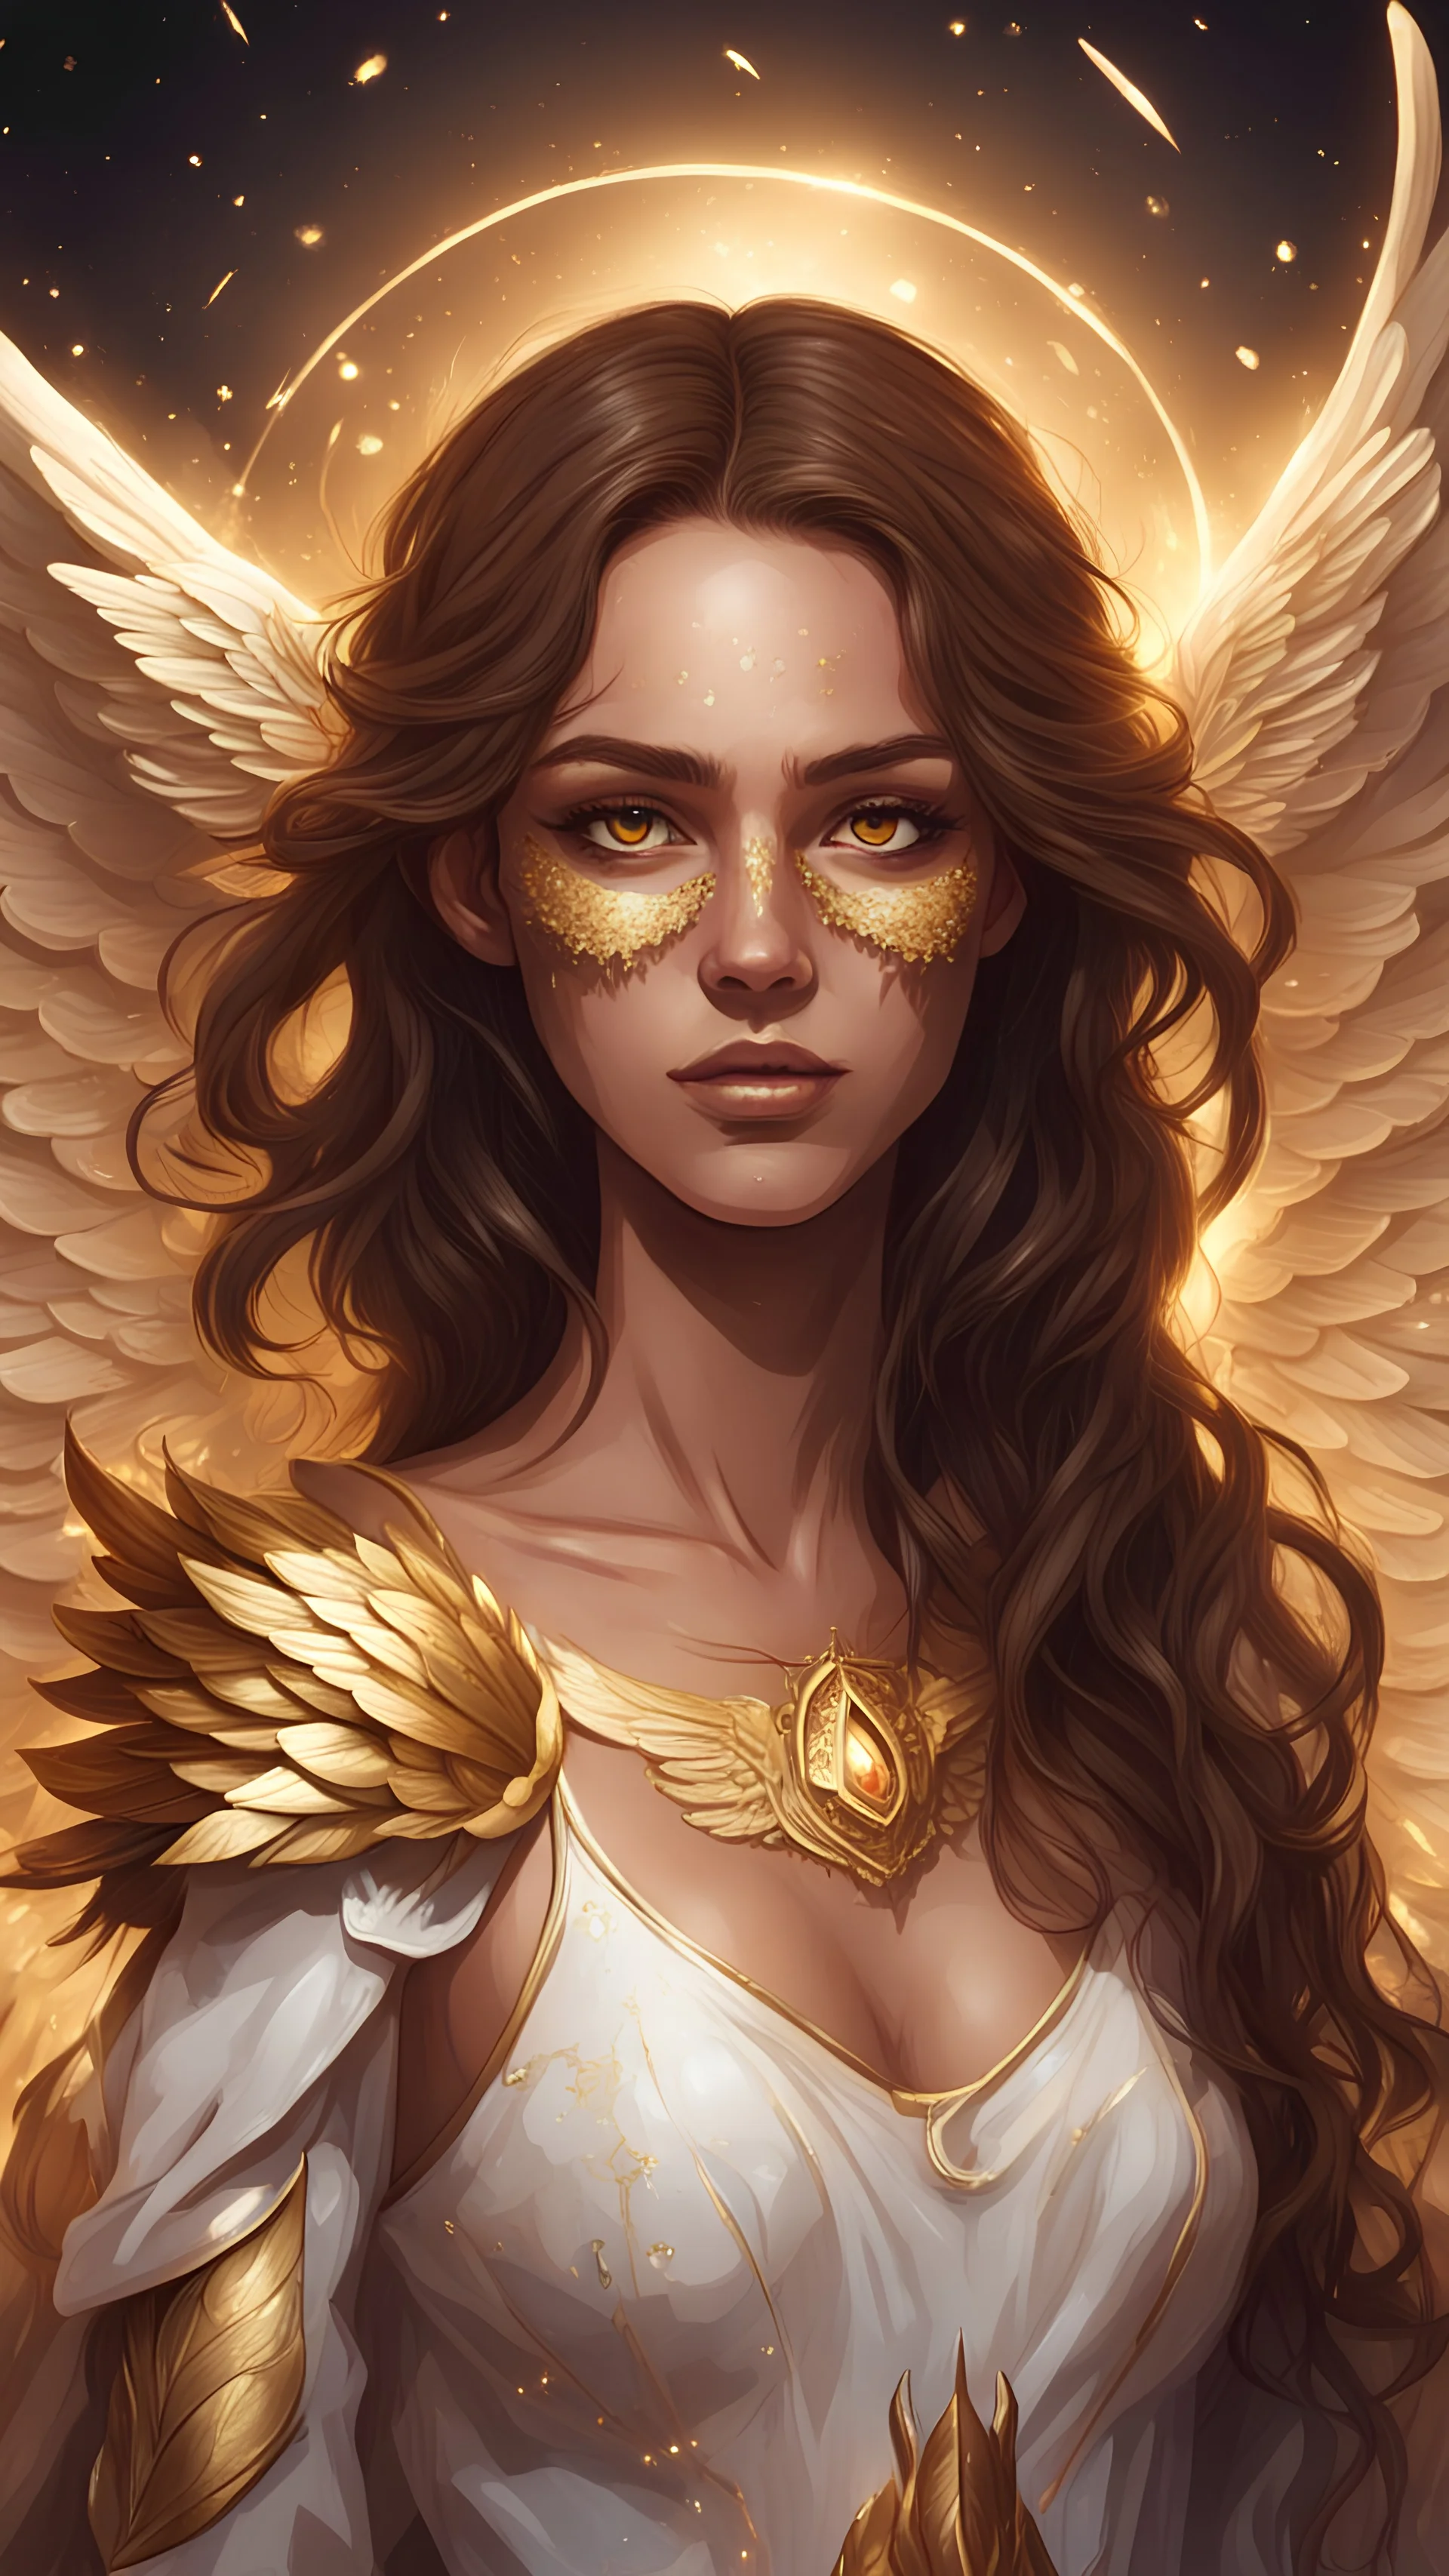 Young woman in arcane art style. Brown hair and gold eyes, Light brown skin, golden freckles, wings for ears